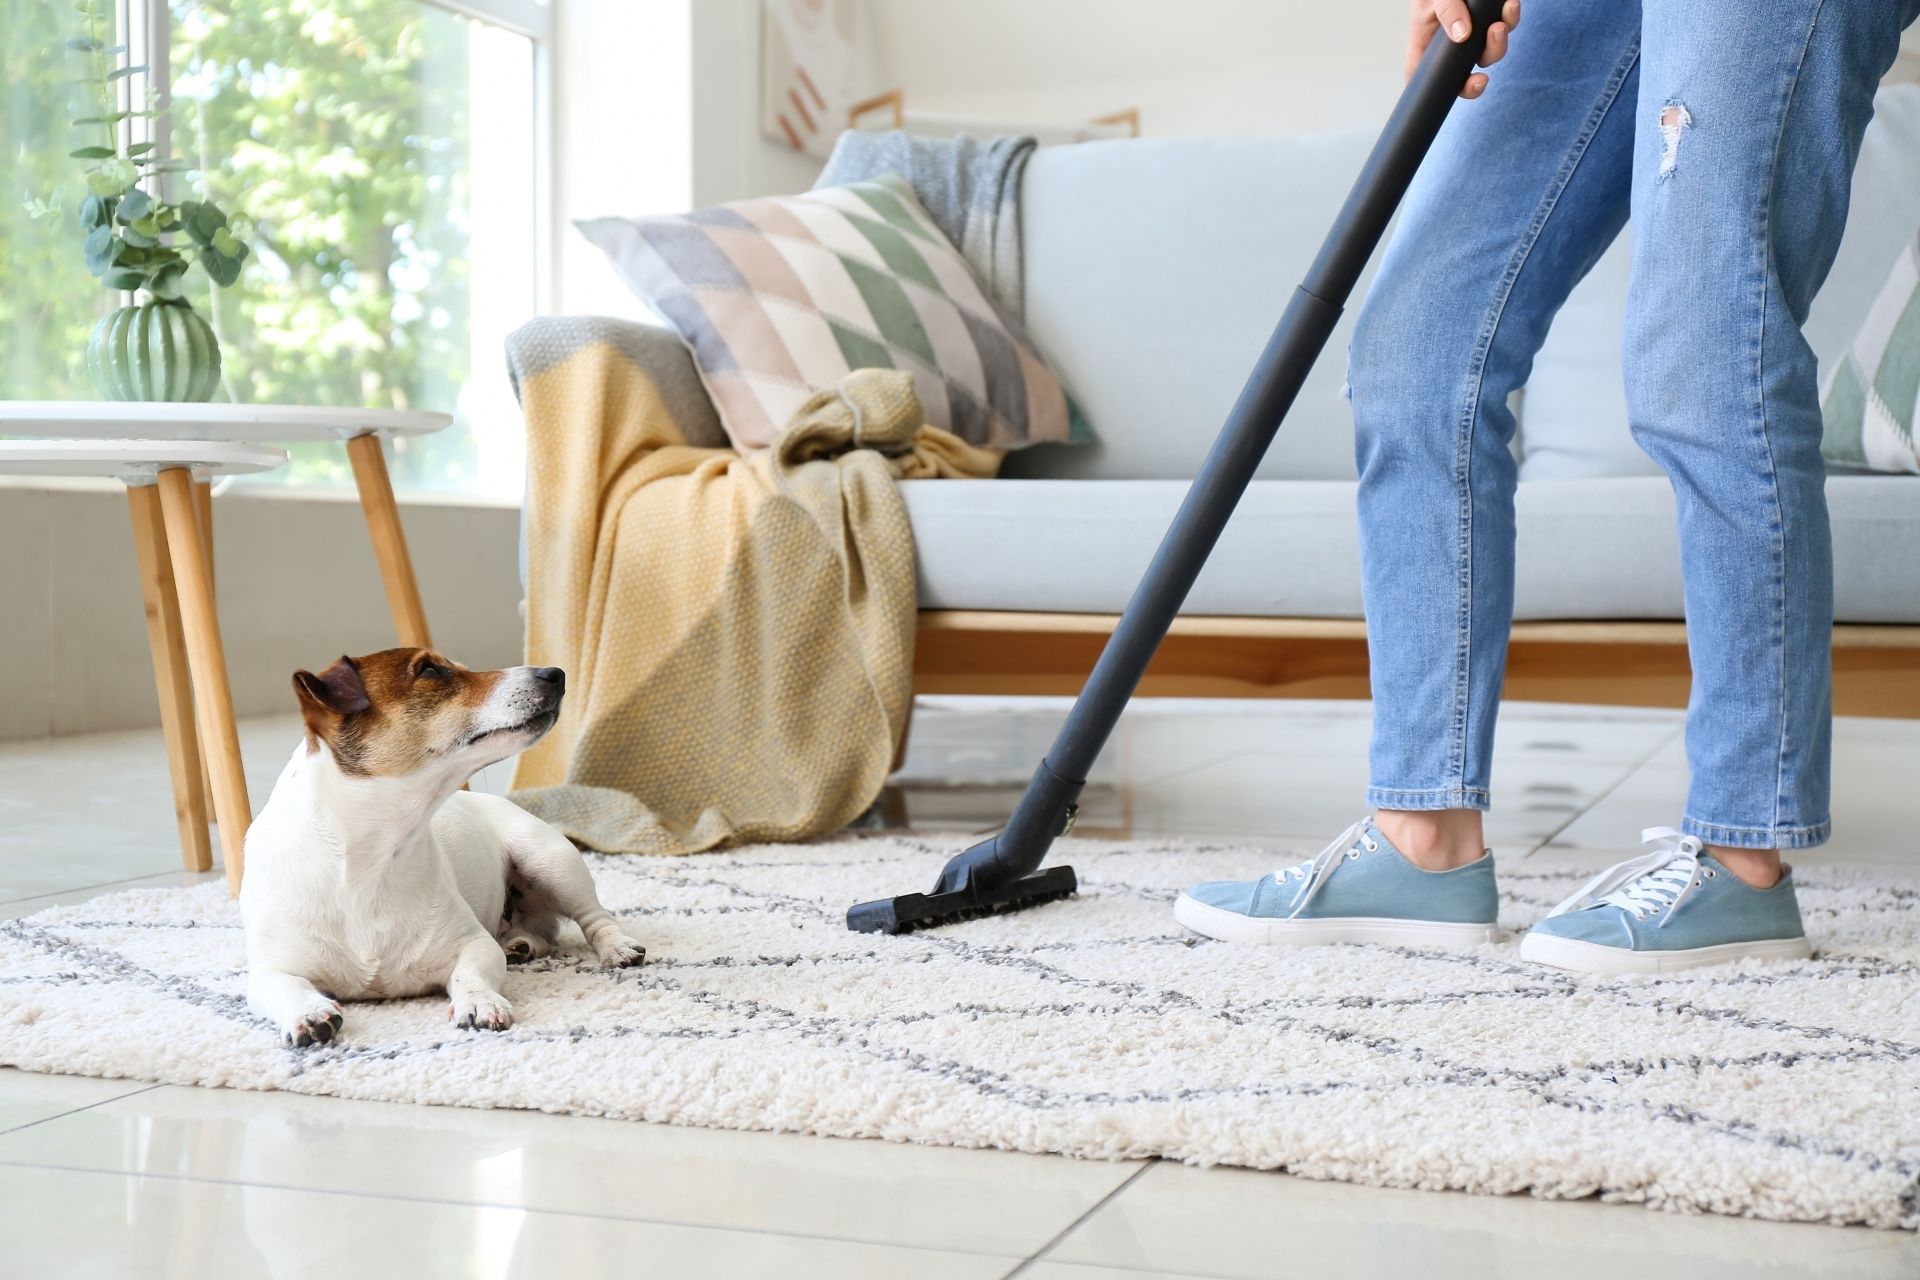 Home Cleaning Hacks that’ll Help You Save Money